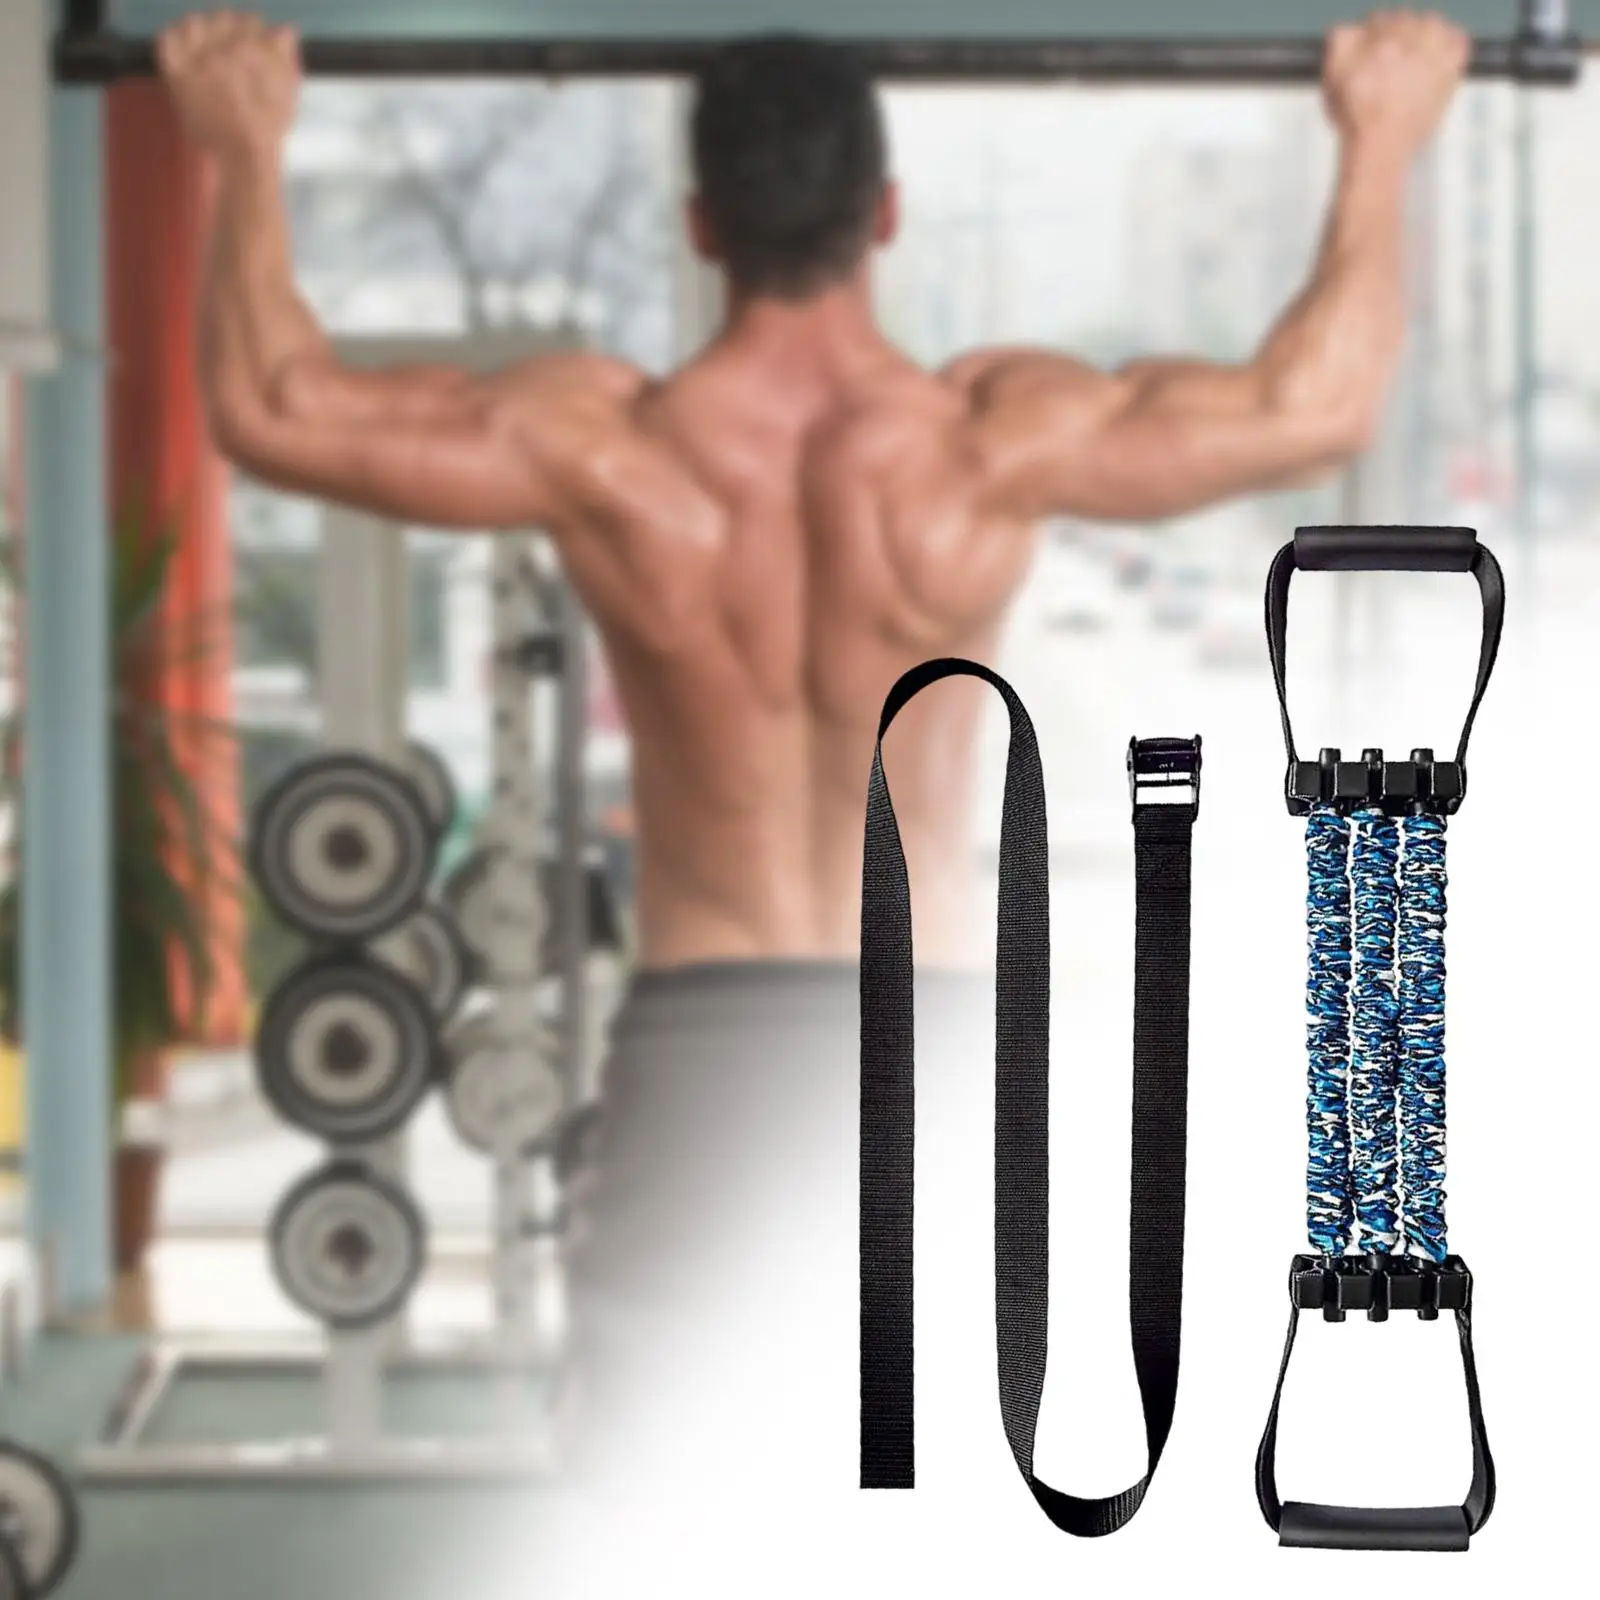 Chin up Assist Bands Resistance Bands Assistance Band for Strength Training Fitness Improve Arm, Shoulders and Chest Strength